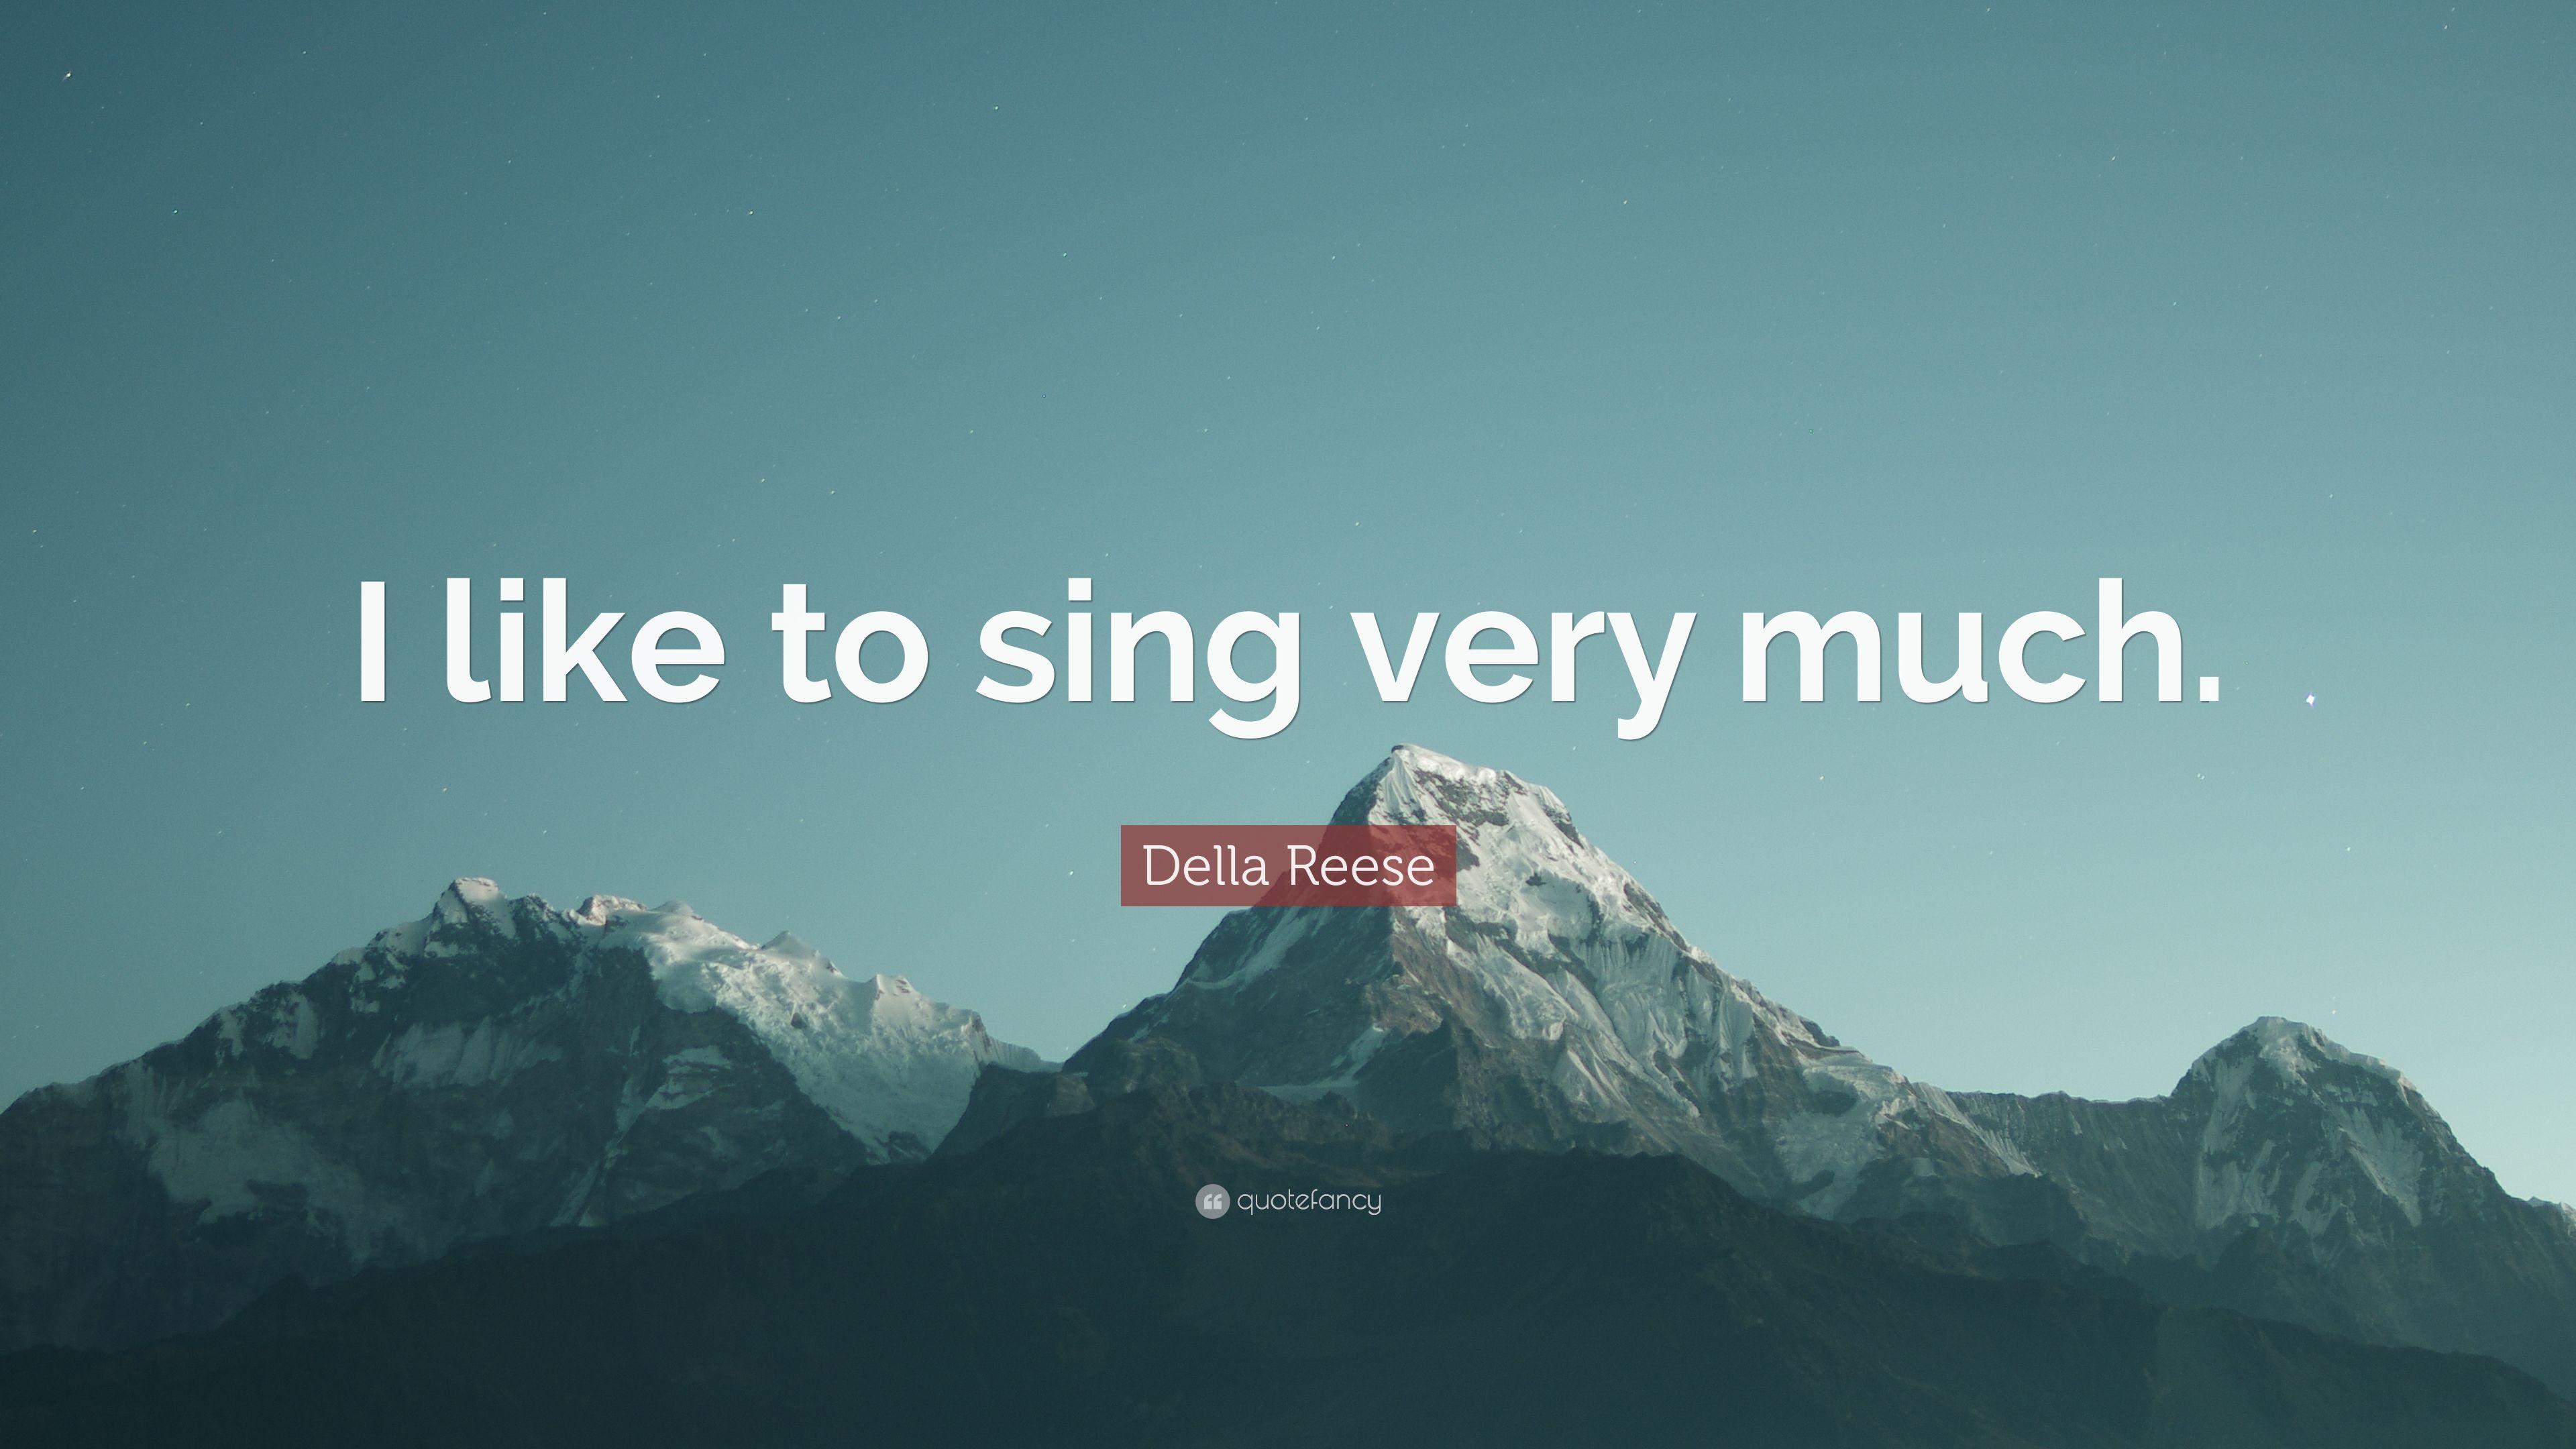 Della Reese Quote: “I like to sing very much.” 5 wallpaper